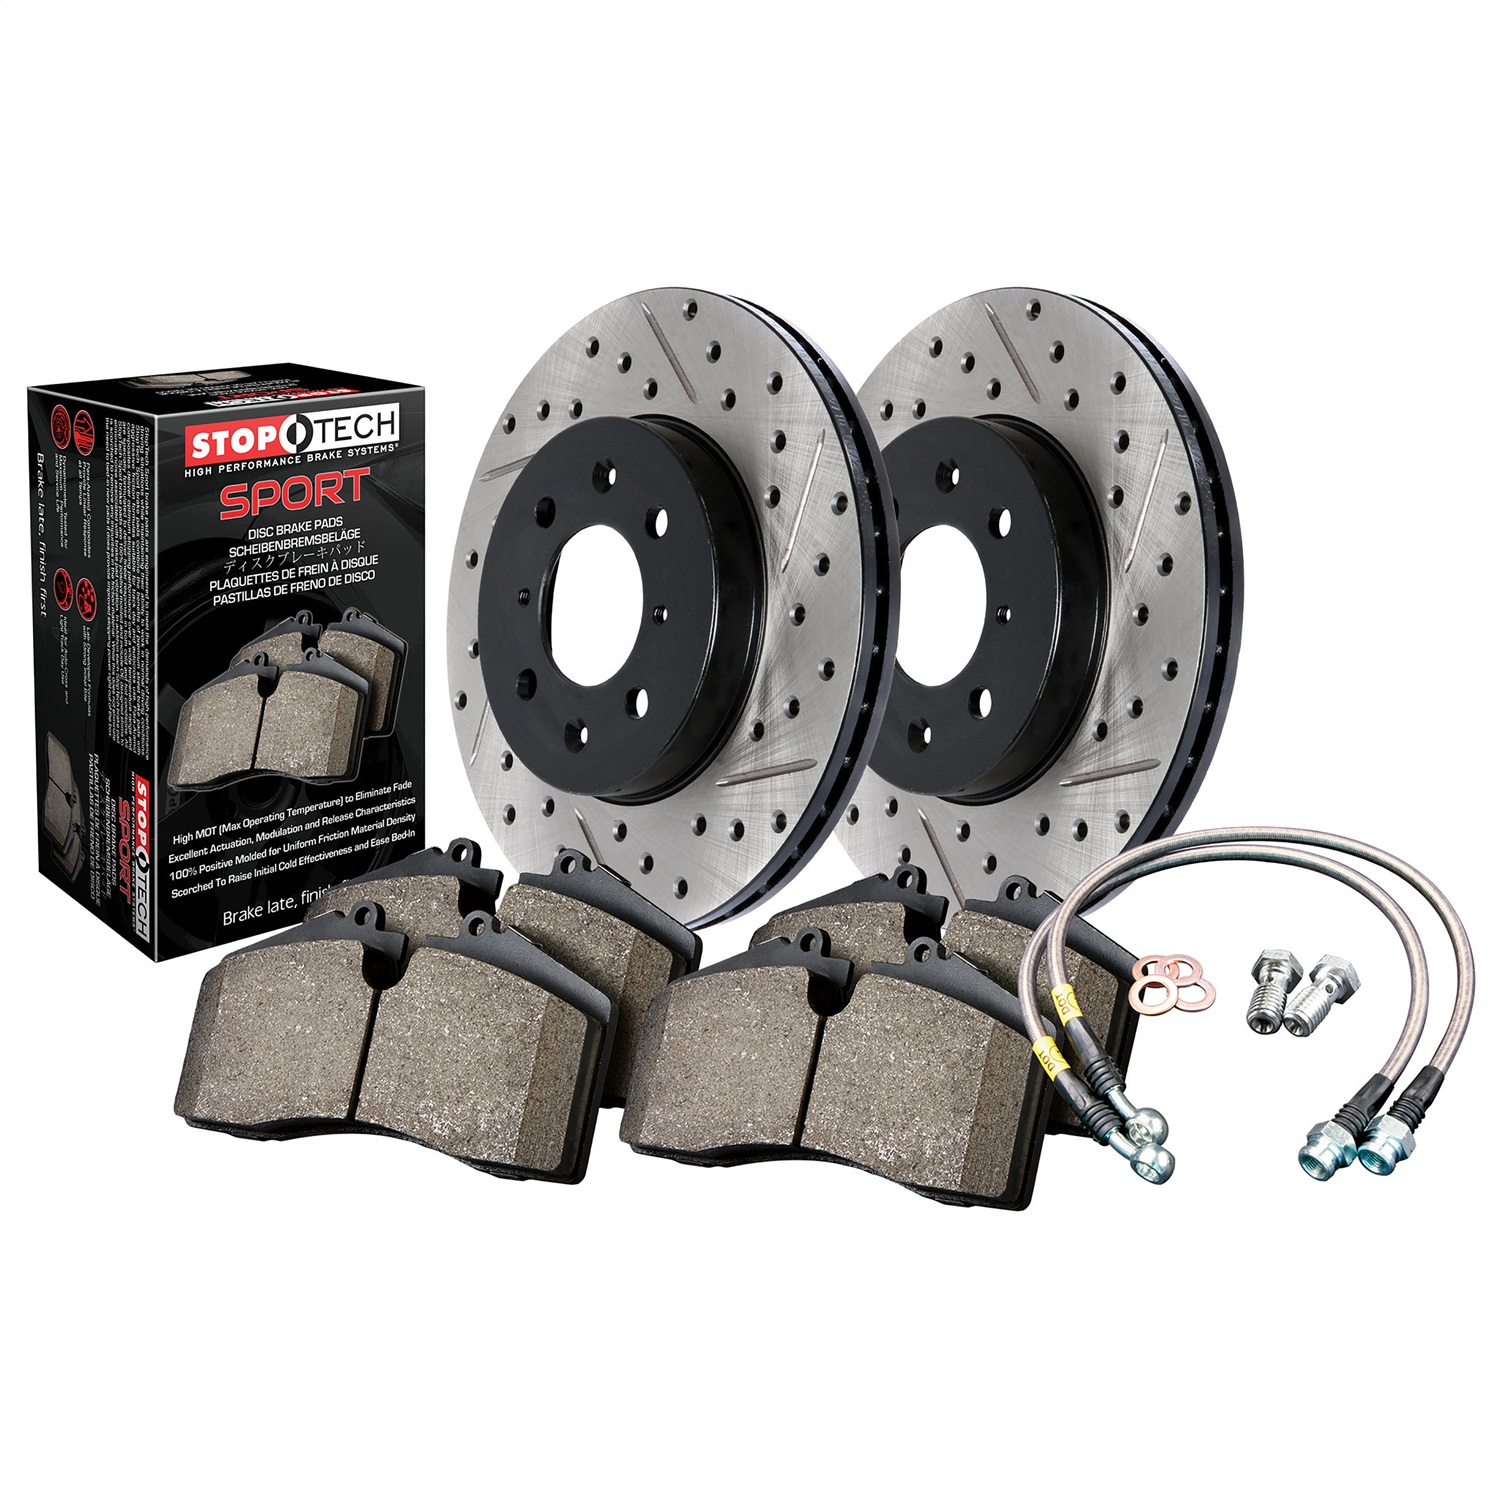 StopTech 978.61009F Sport Disc Brake Kit w/Cross-Drilled And Slotted Rotors